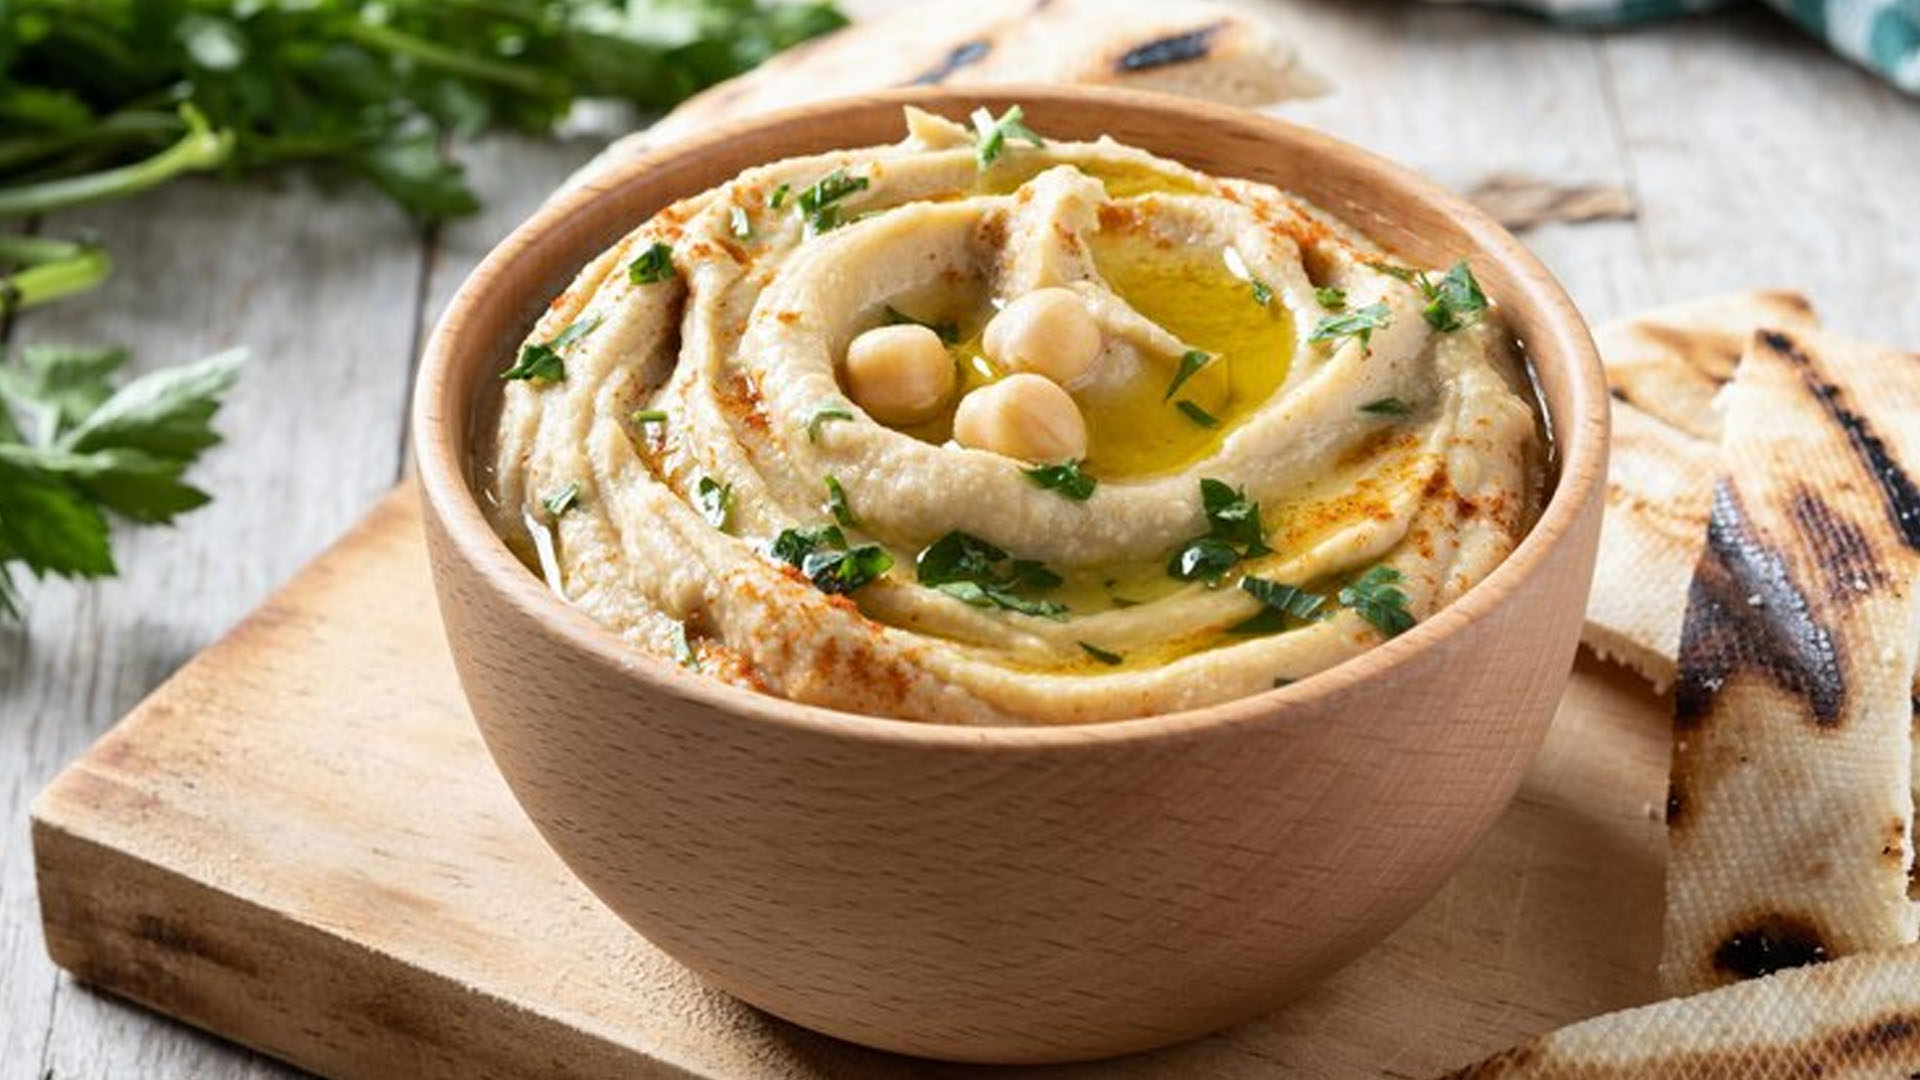 What are the Health Benefits of Hummus?